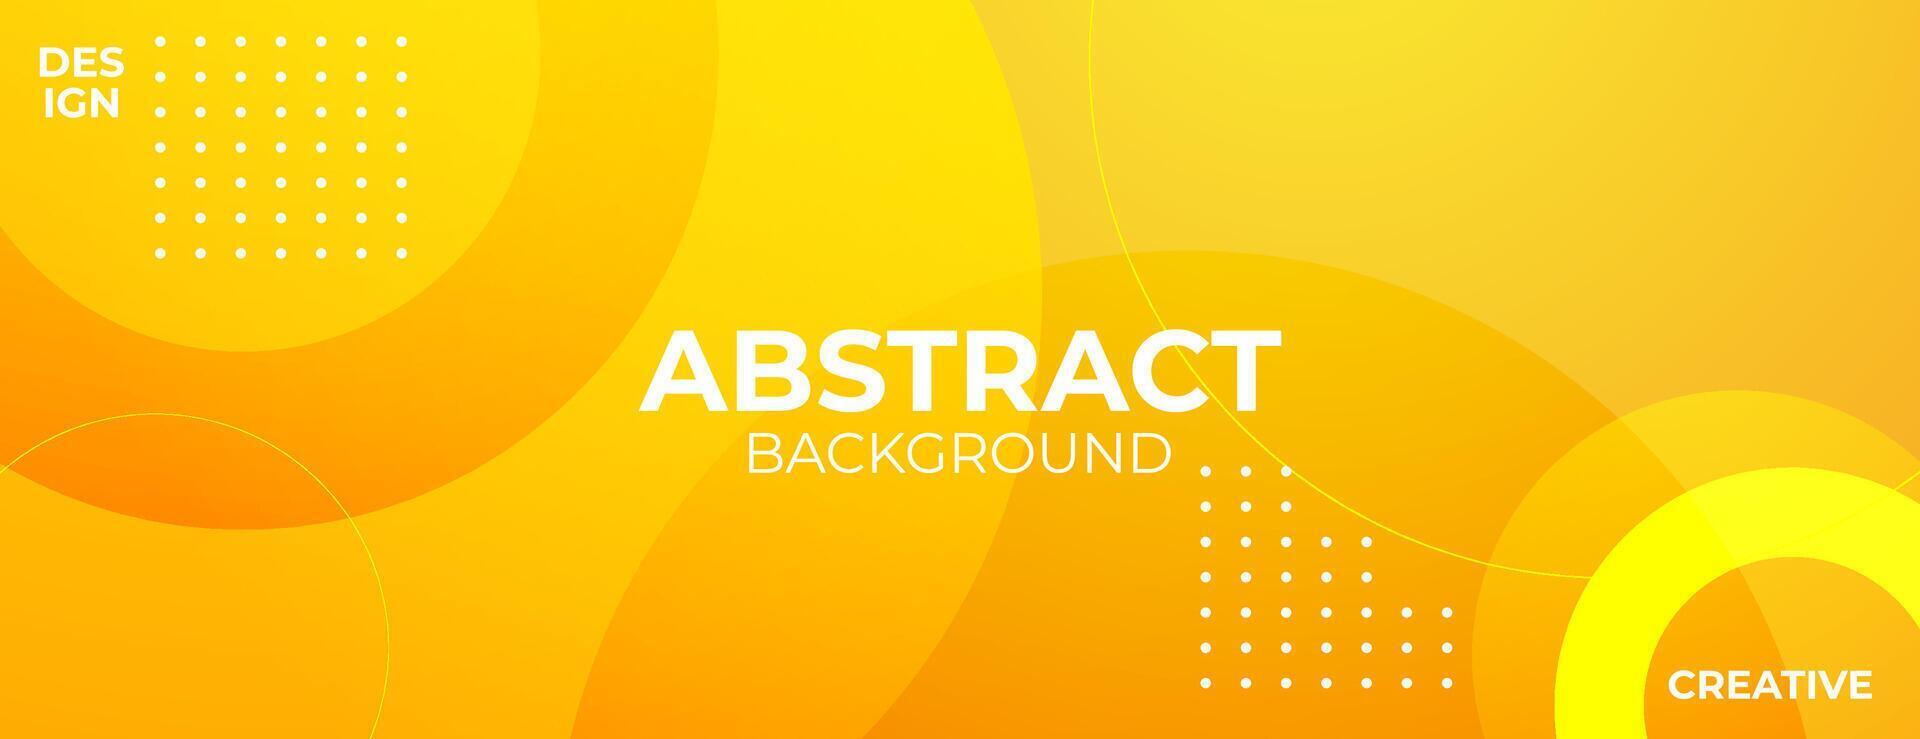 yellow orange geometric background with circle shapes for banner, poster, presentation, web, etc. vector